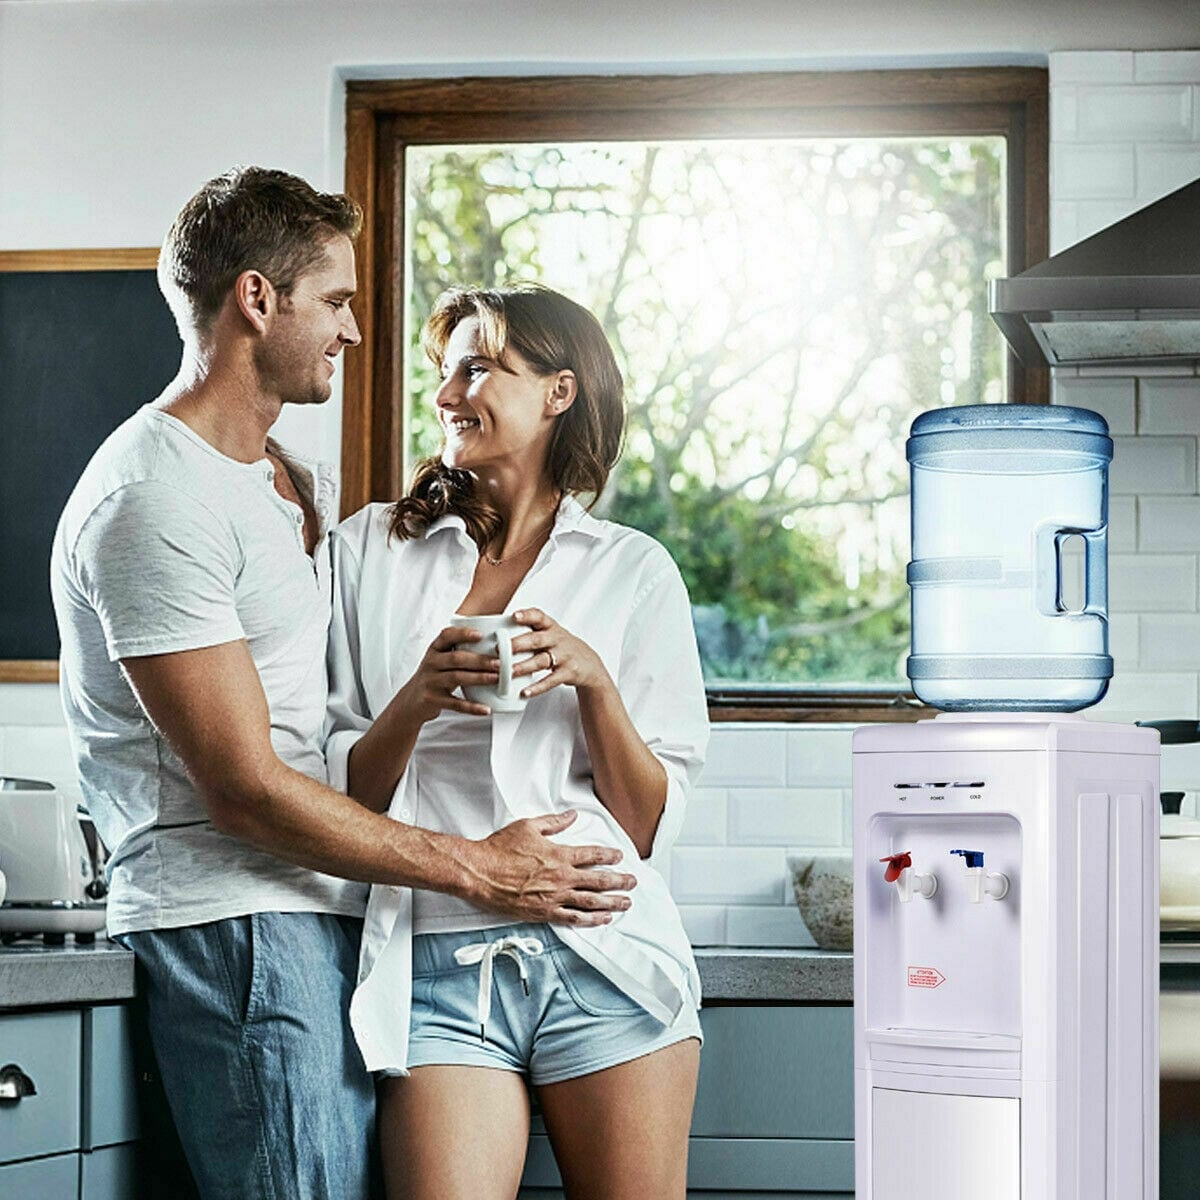 https://ak1.ostkcdn.com/images/products/is/images/direct/45f696a3e283a083bbda66a764b470725f582e50/Water-Dispenser-5-Gallon-Bottle-Load-Electric-Primo-Home.jpg